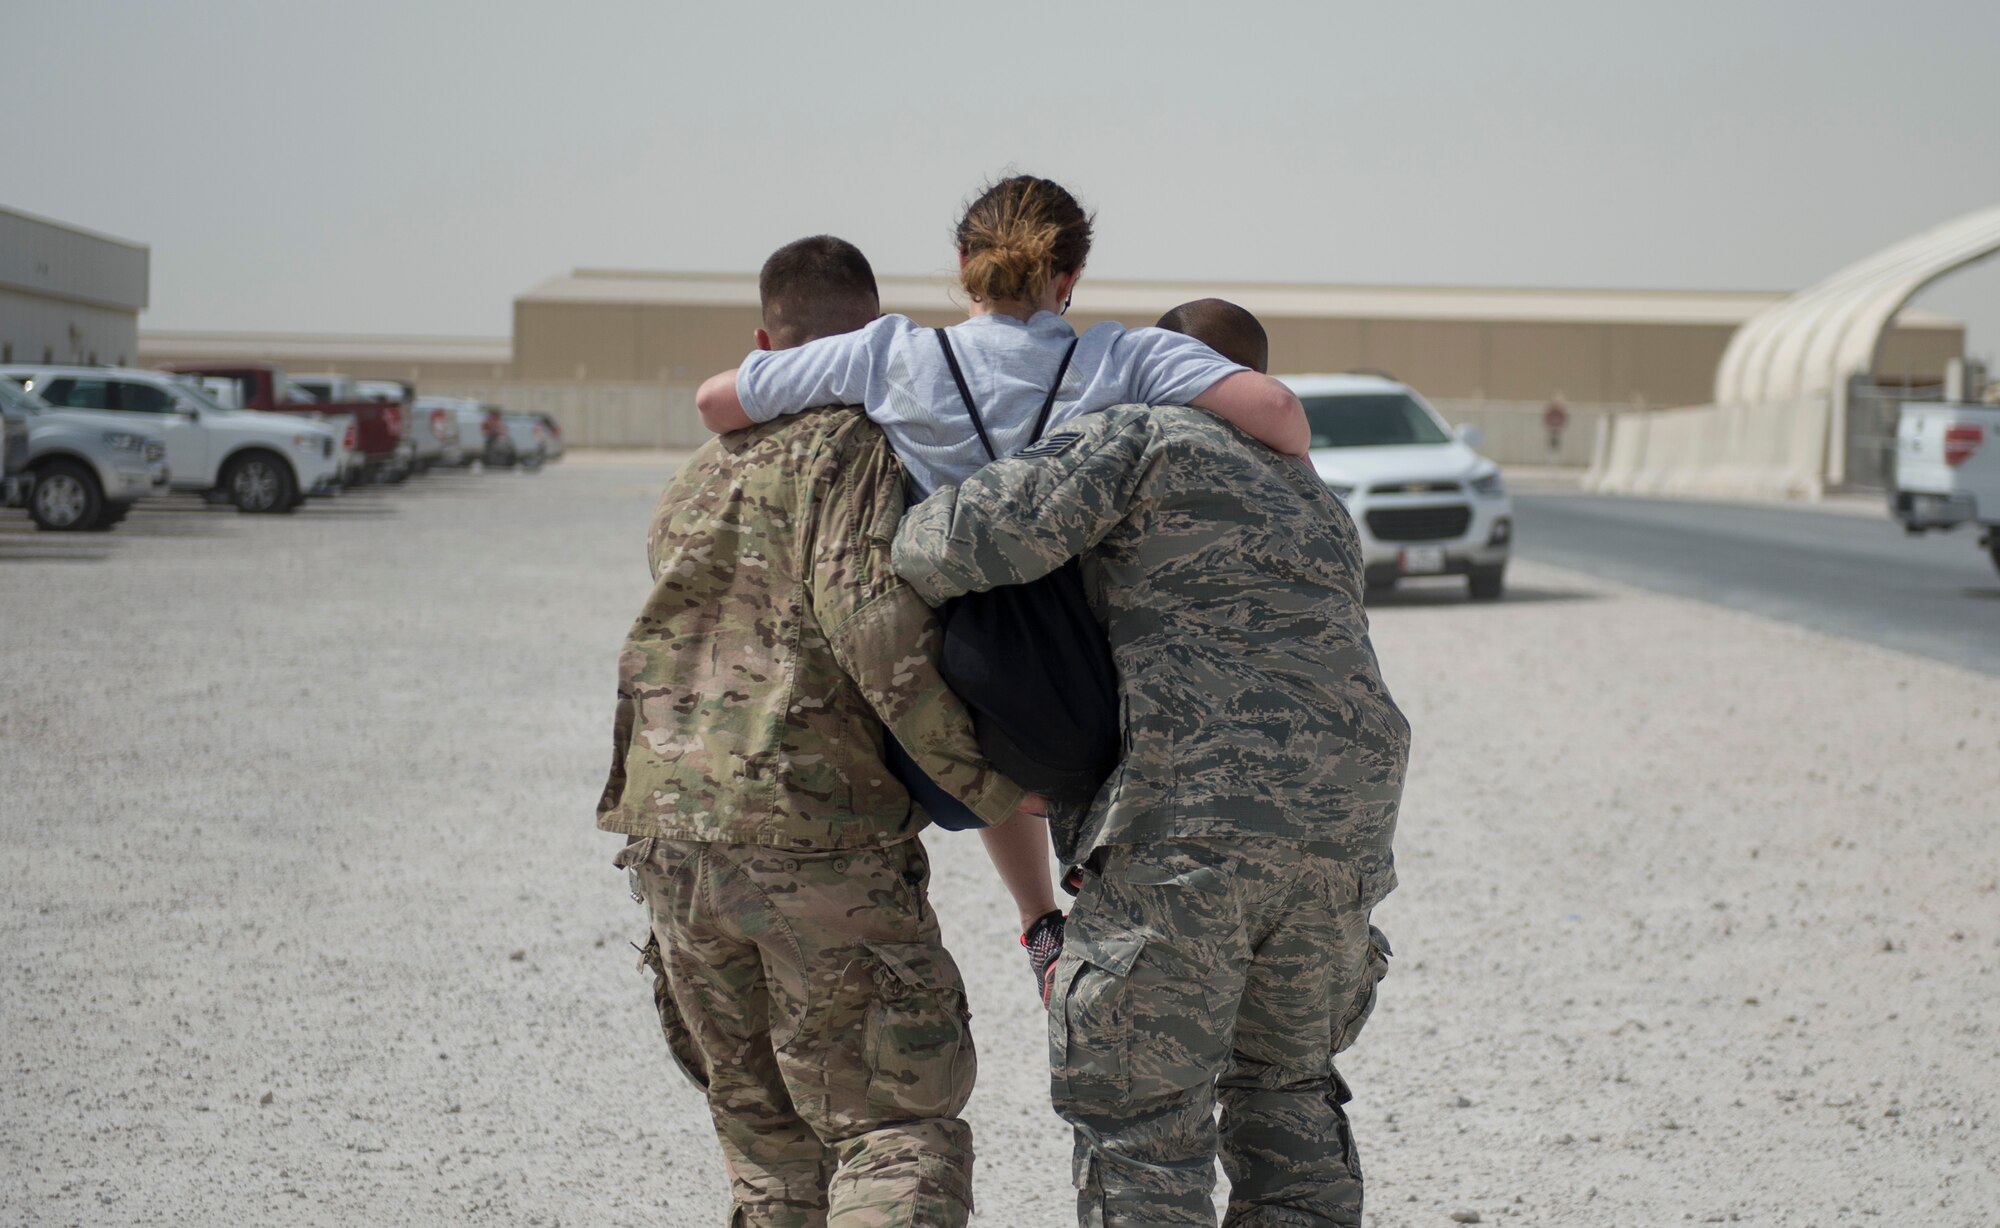 U.S. Air Force Airmen from the 379th Expeditionary Air Expeditionary Wing carries a simulated wounded airman to safety at Al Udeid Air Base, Qatar, April 17, 2017. The active shooter exercise tested the skills and abilities of Airmen to work with other units in in order to gain a better understanding of each other’s roles in the event of a real-world situation.   (U.S. Air Force photo by Tech. Sgt. Amy M. Lovgren)